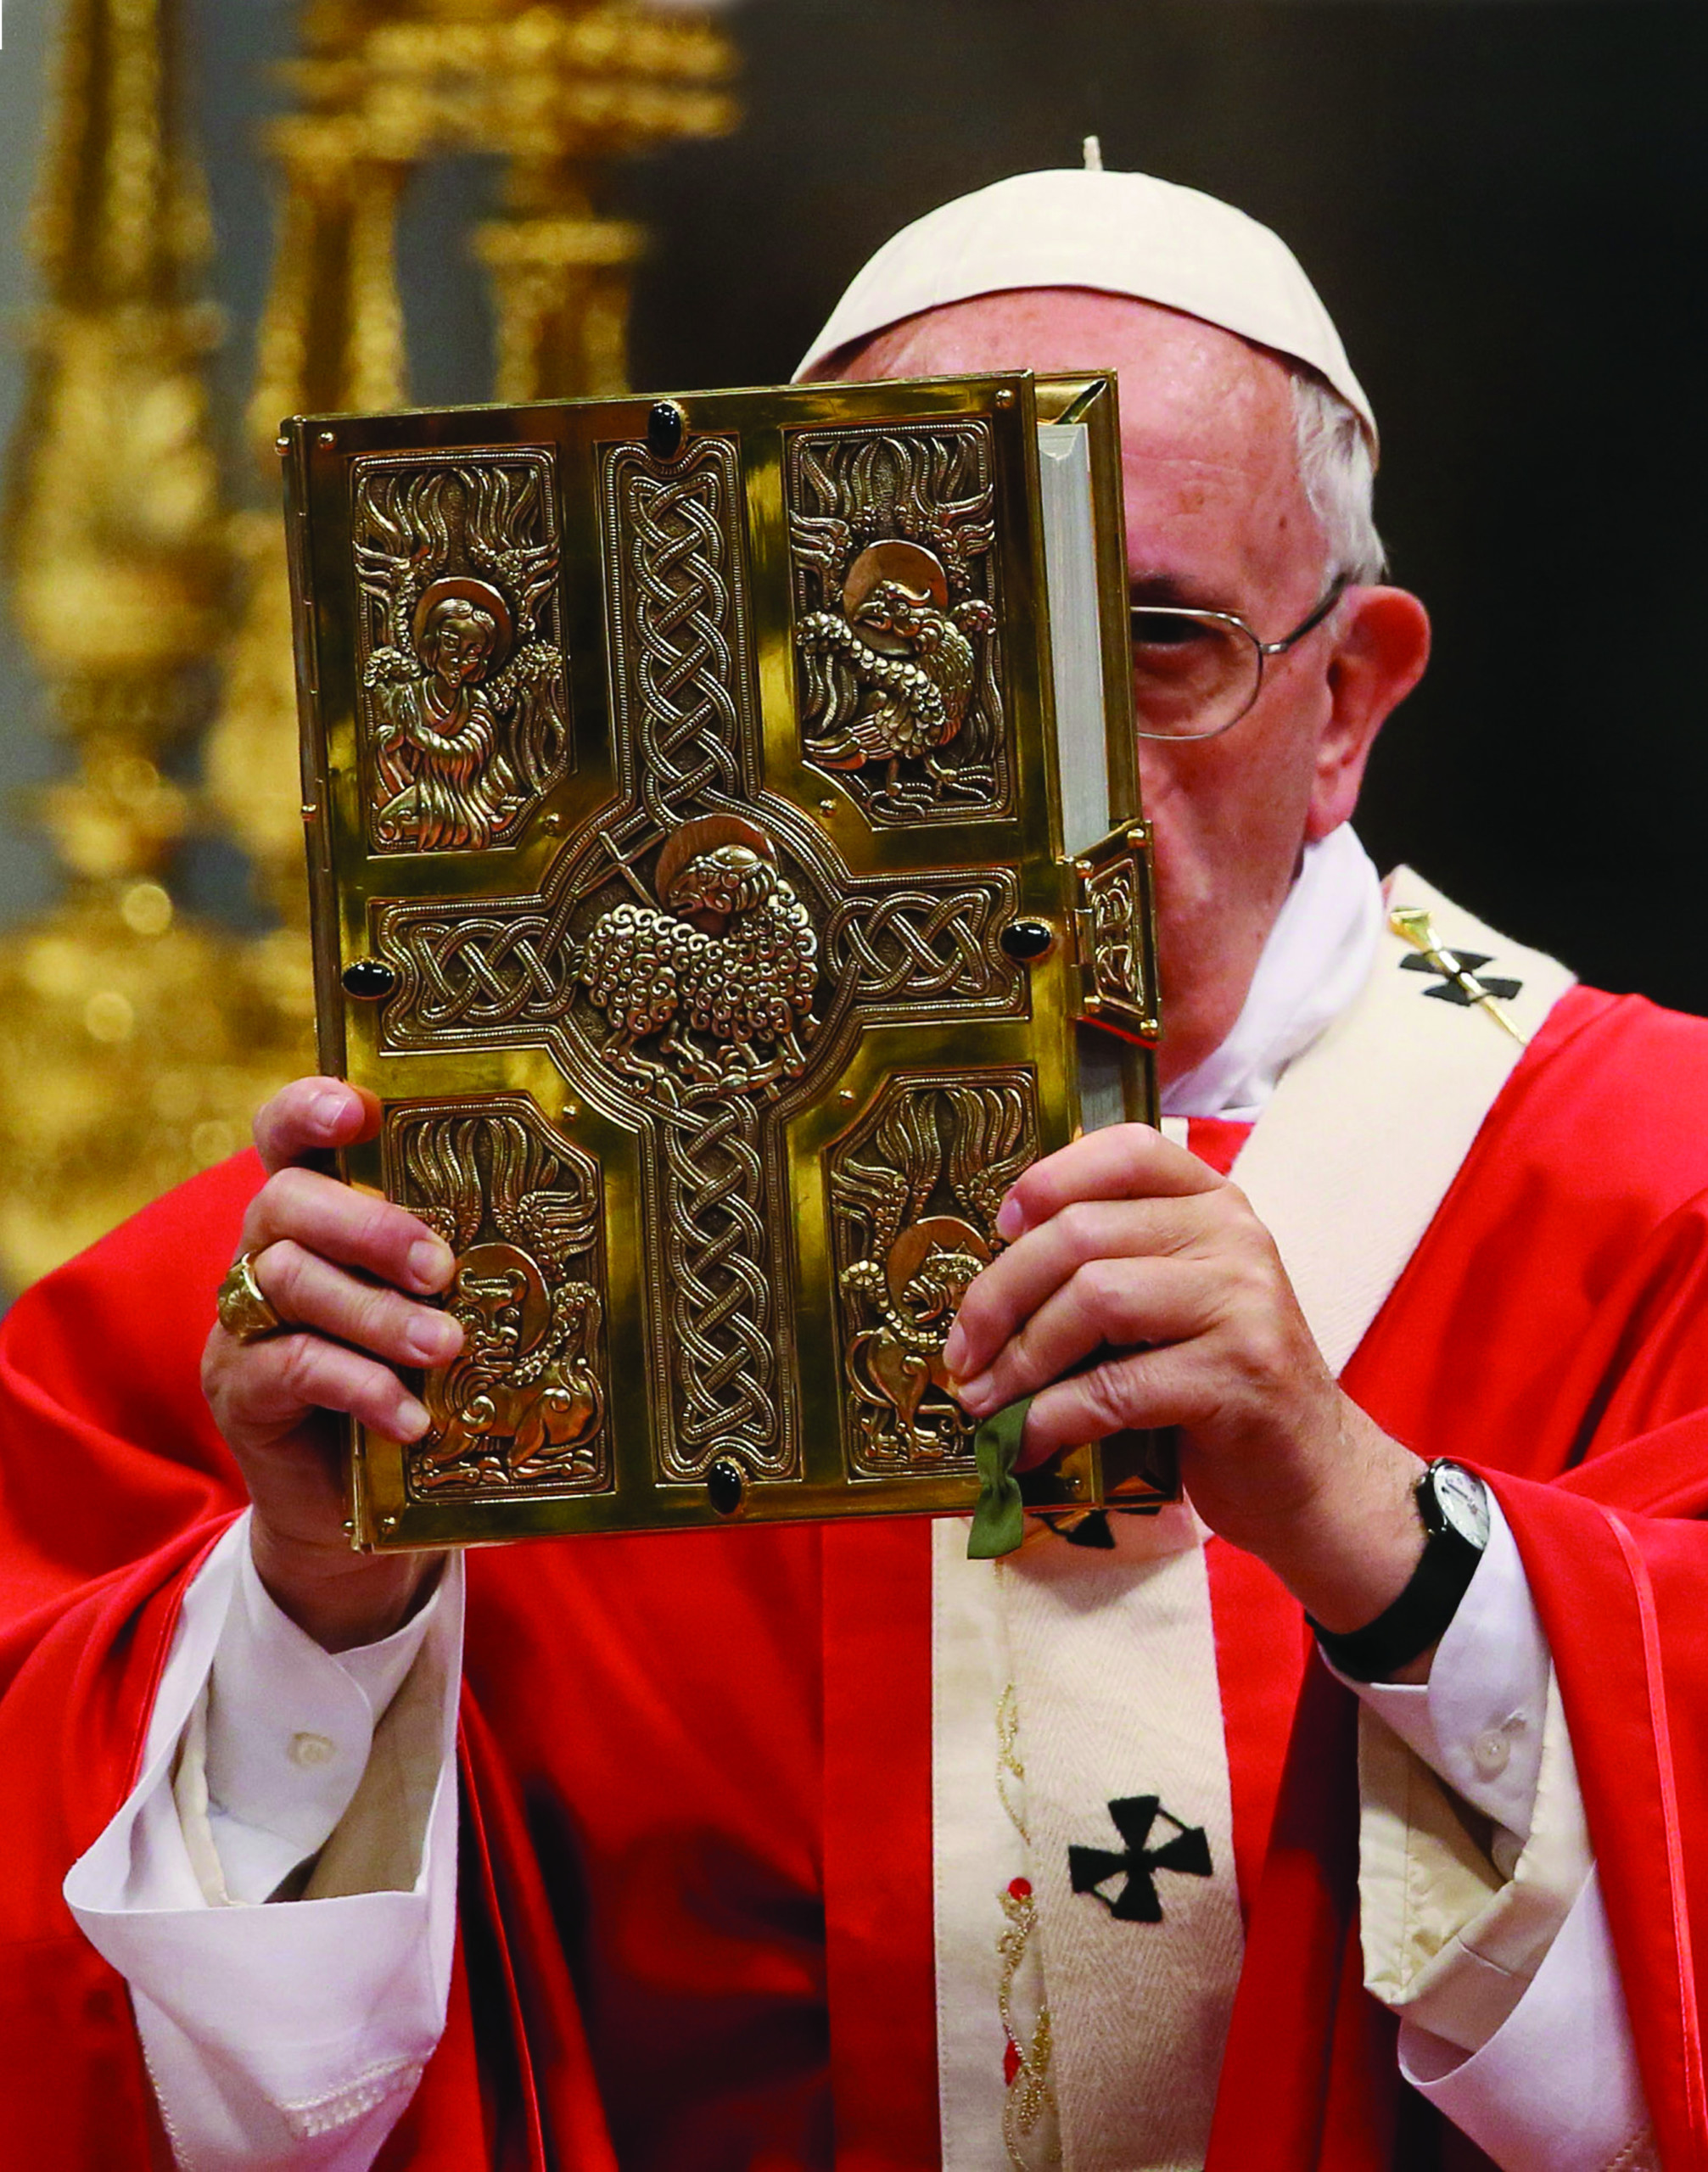 A new Papal document provokes controversy